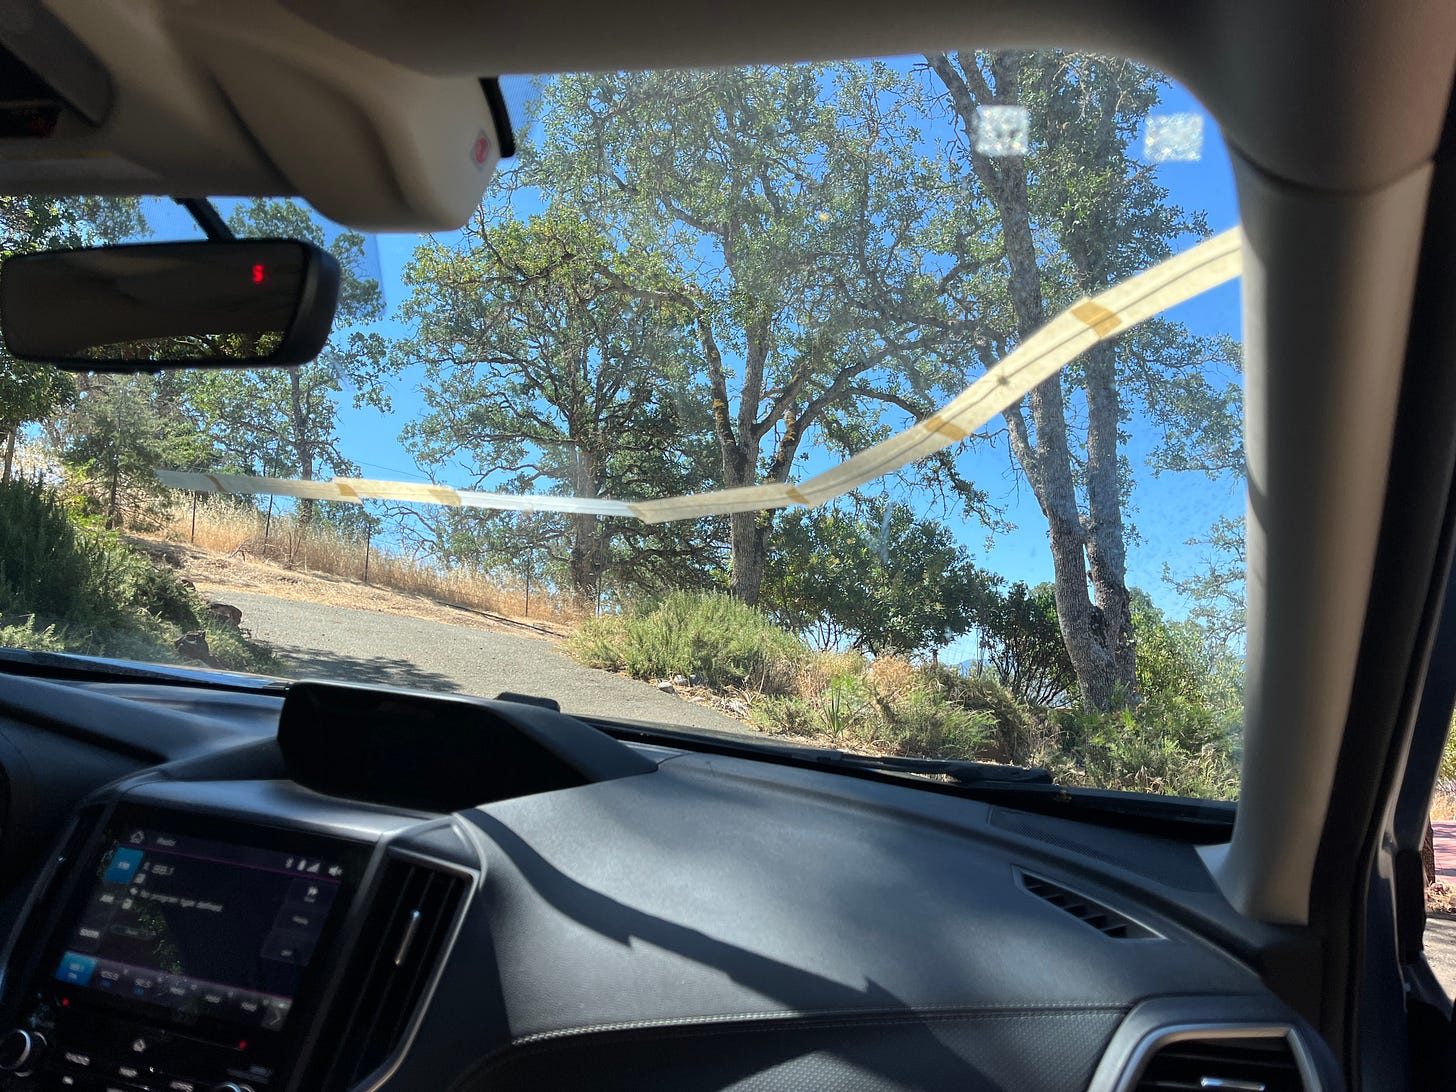 A taped crack in our car windshield